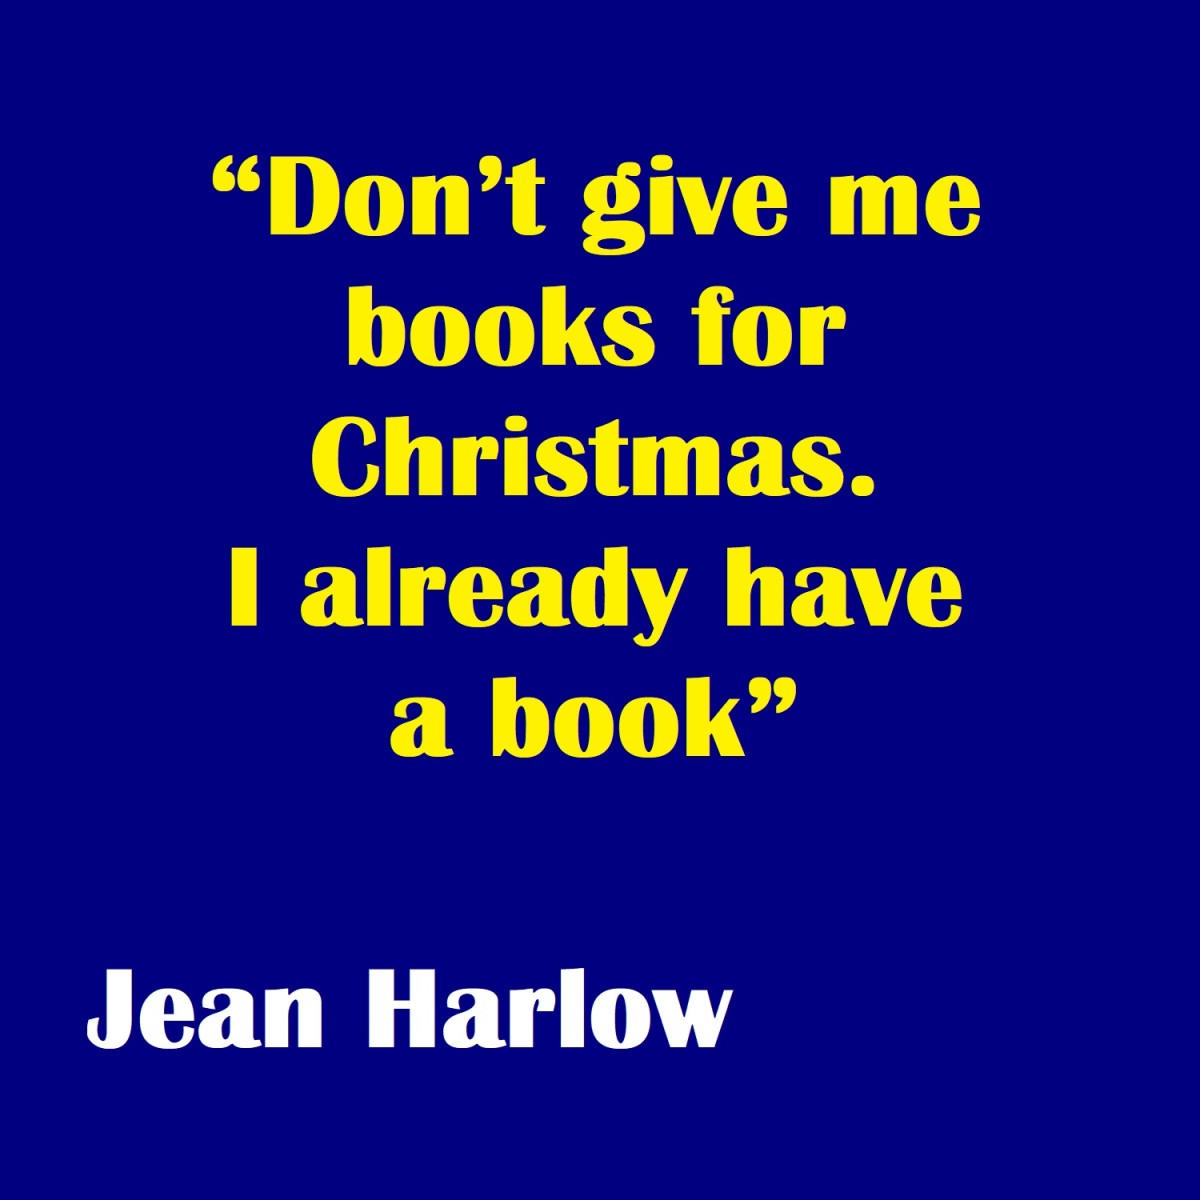 "Don't give me books for Christmas. I already have a book."